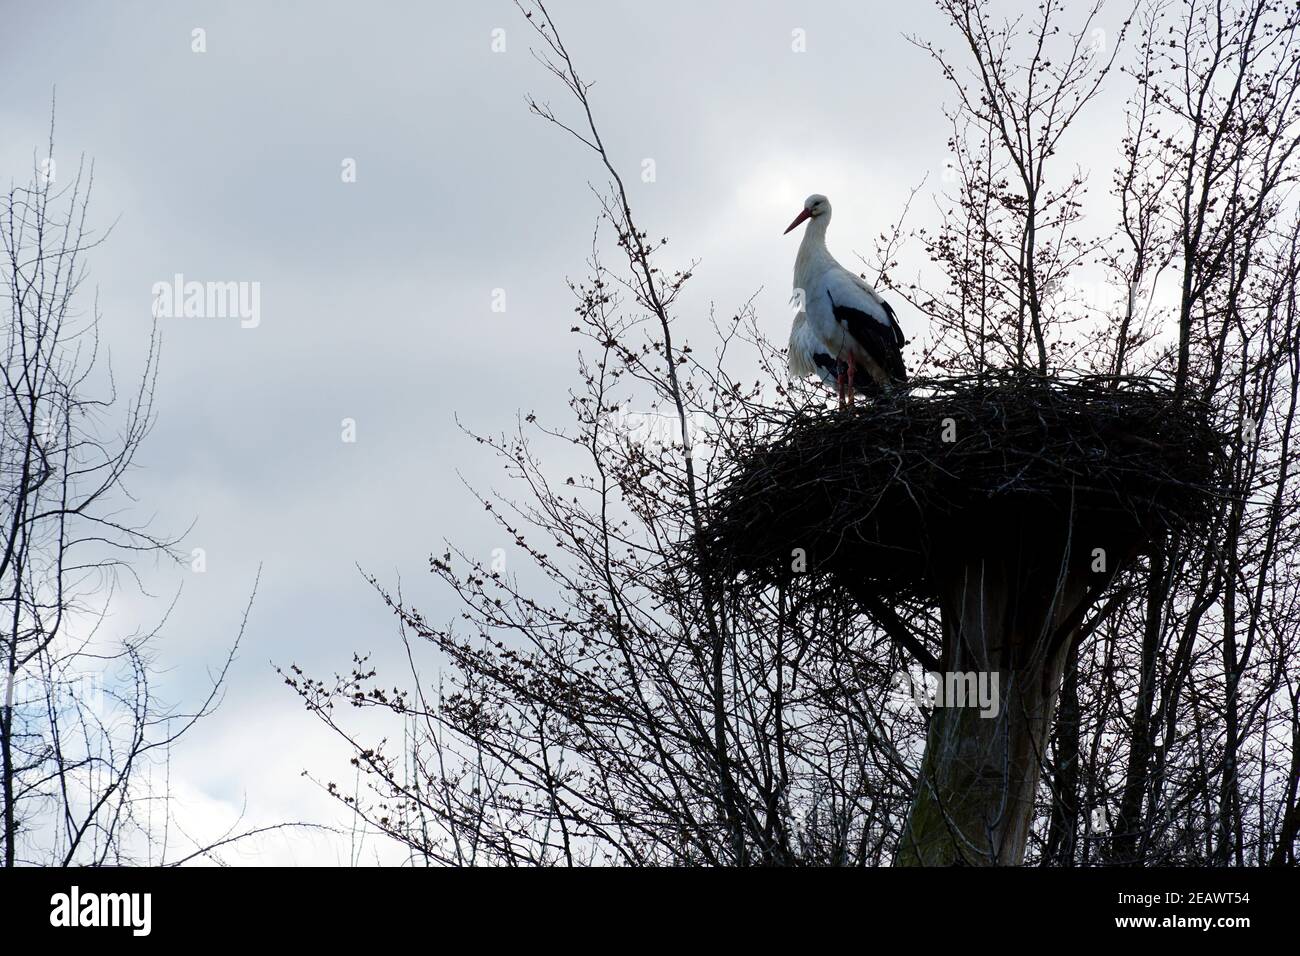 White stork standing in the nest in side view with a lot of copy space on the background. A migratory bird, in Latin called Ciconia ciconia. Stock Photo